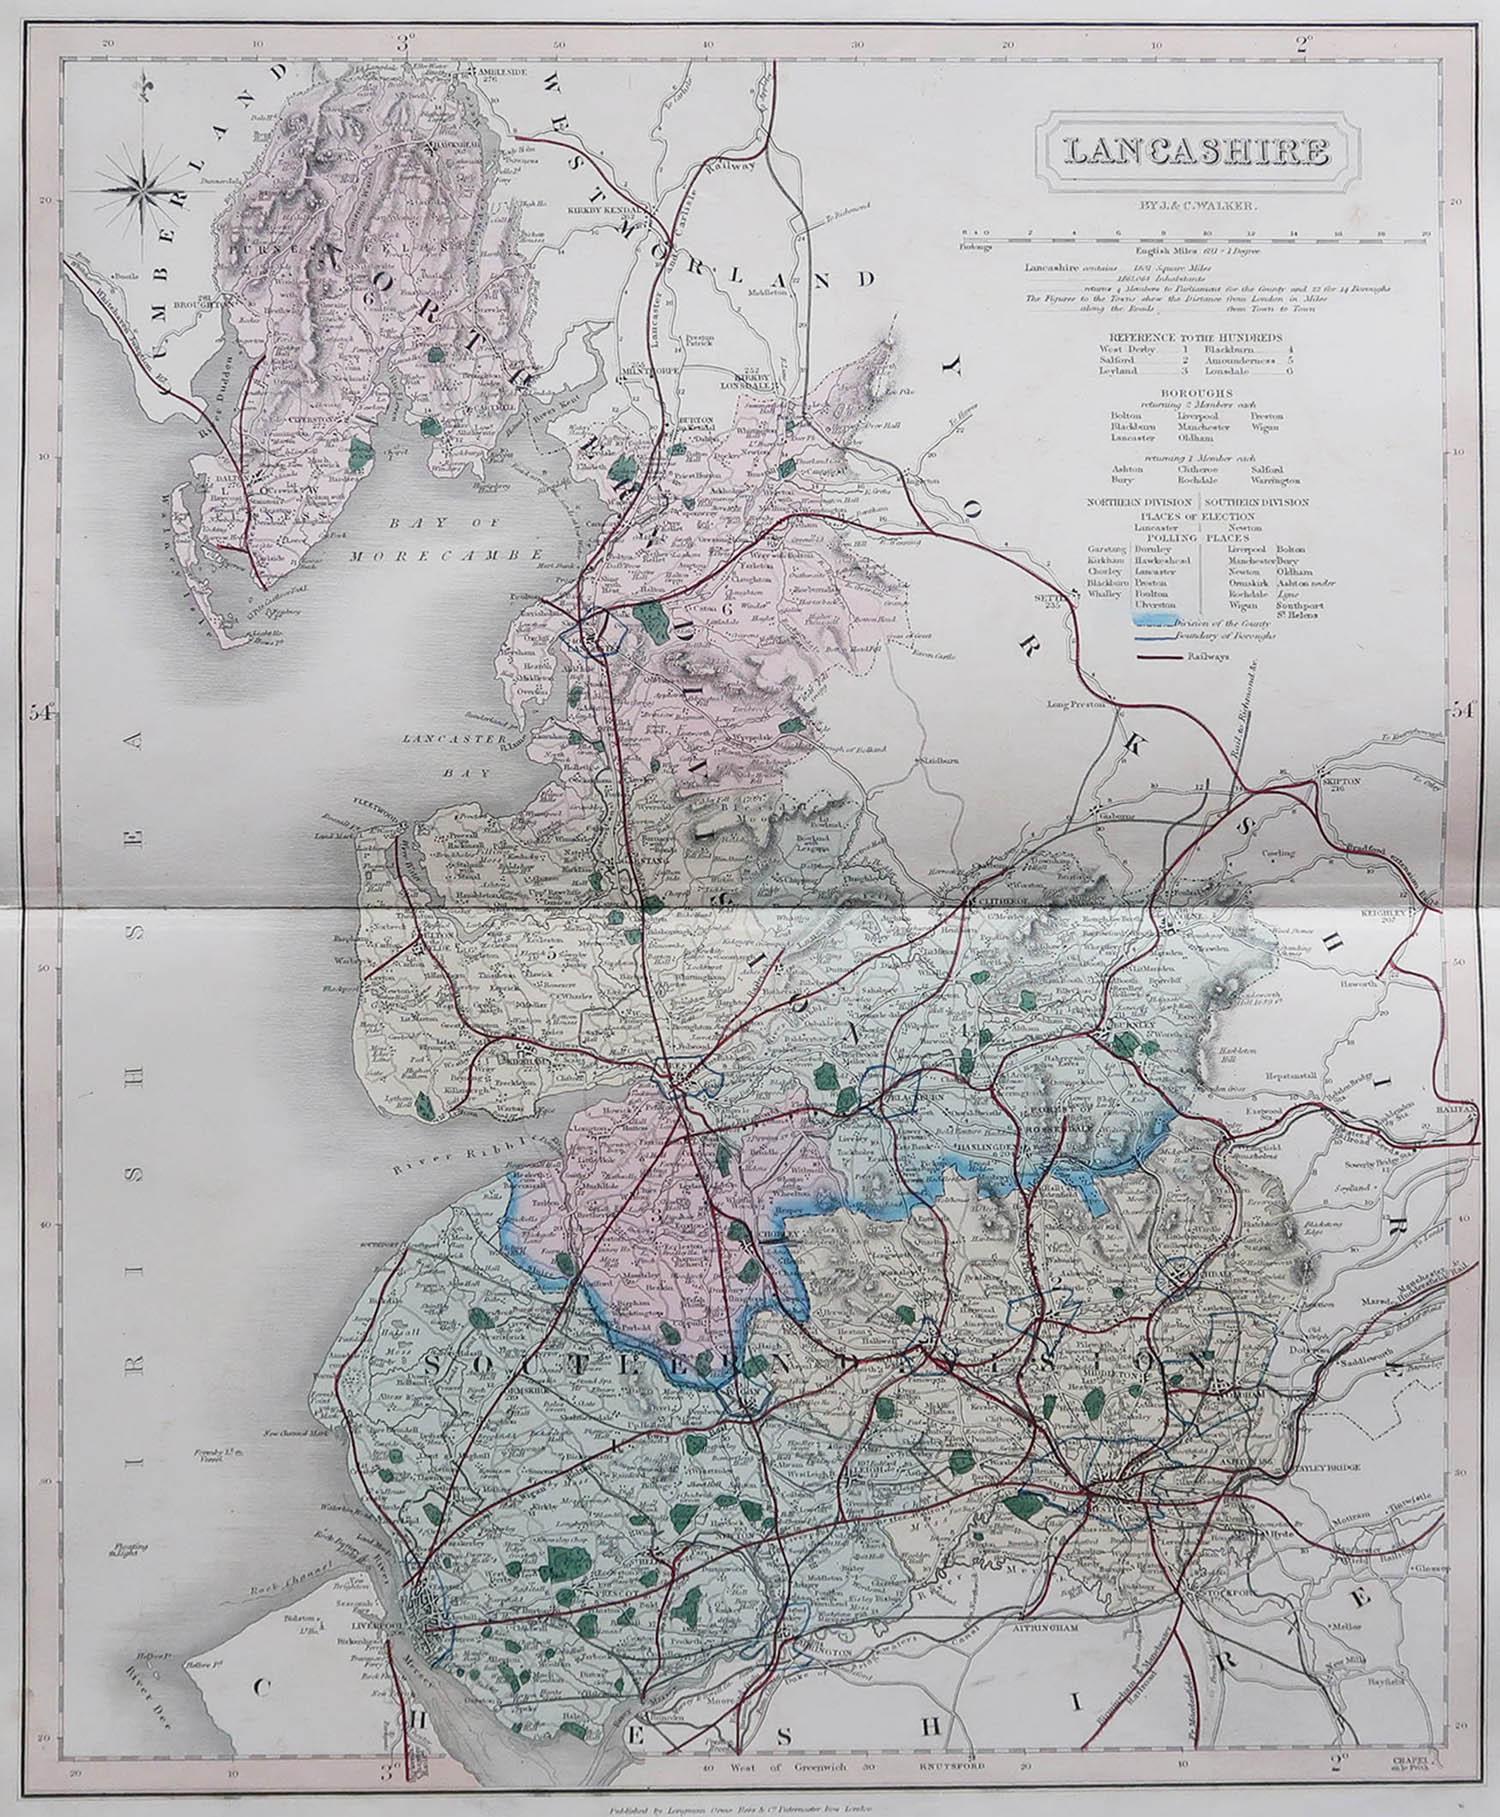 Great map of Lancashire

Original colour

By J & C Walker

Published by Longman, Rees, Orme, Brown & Co. 1851

Unframed.




